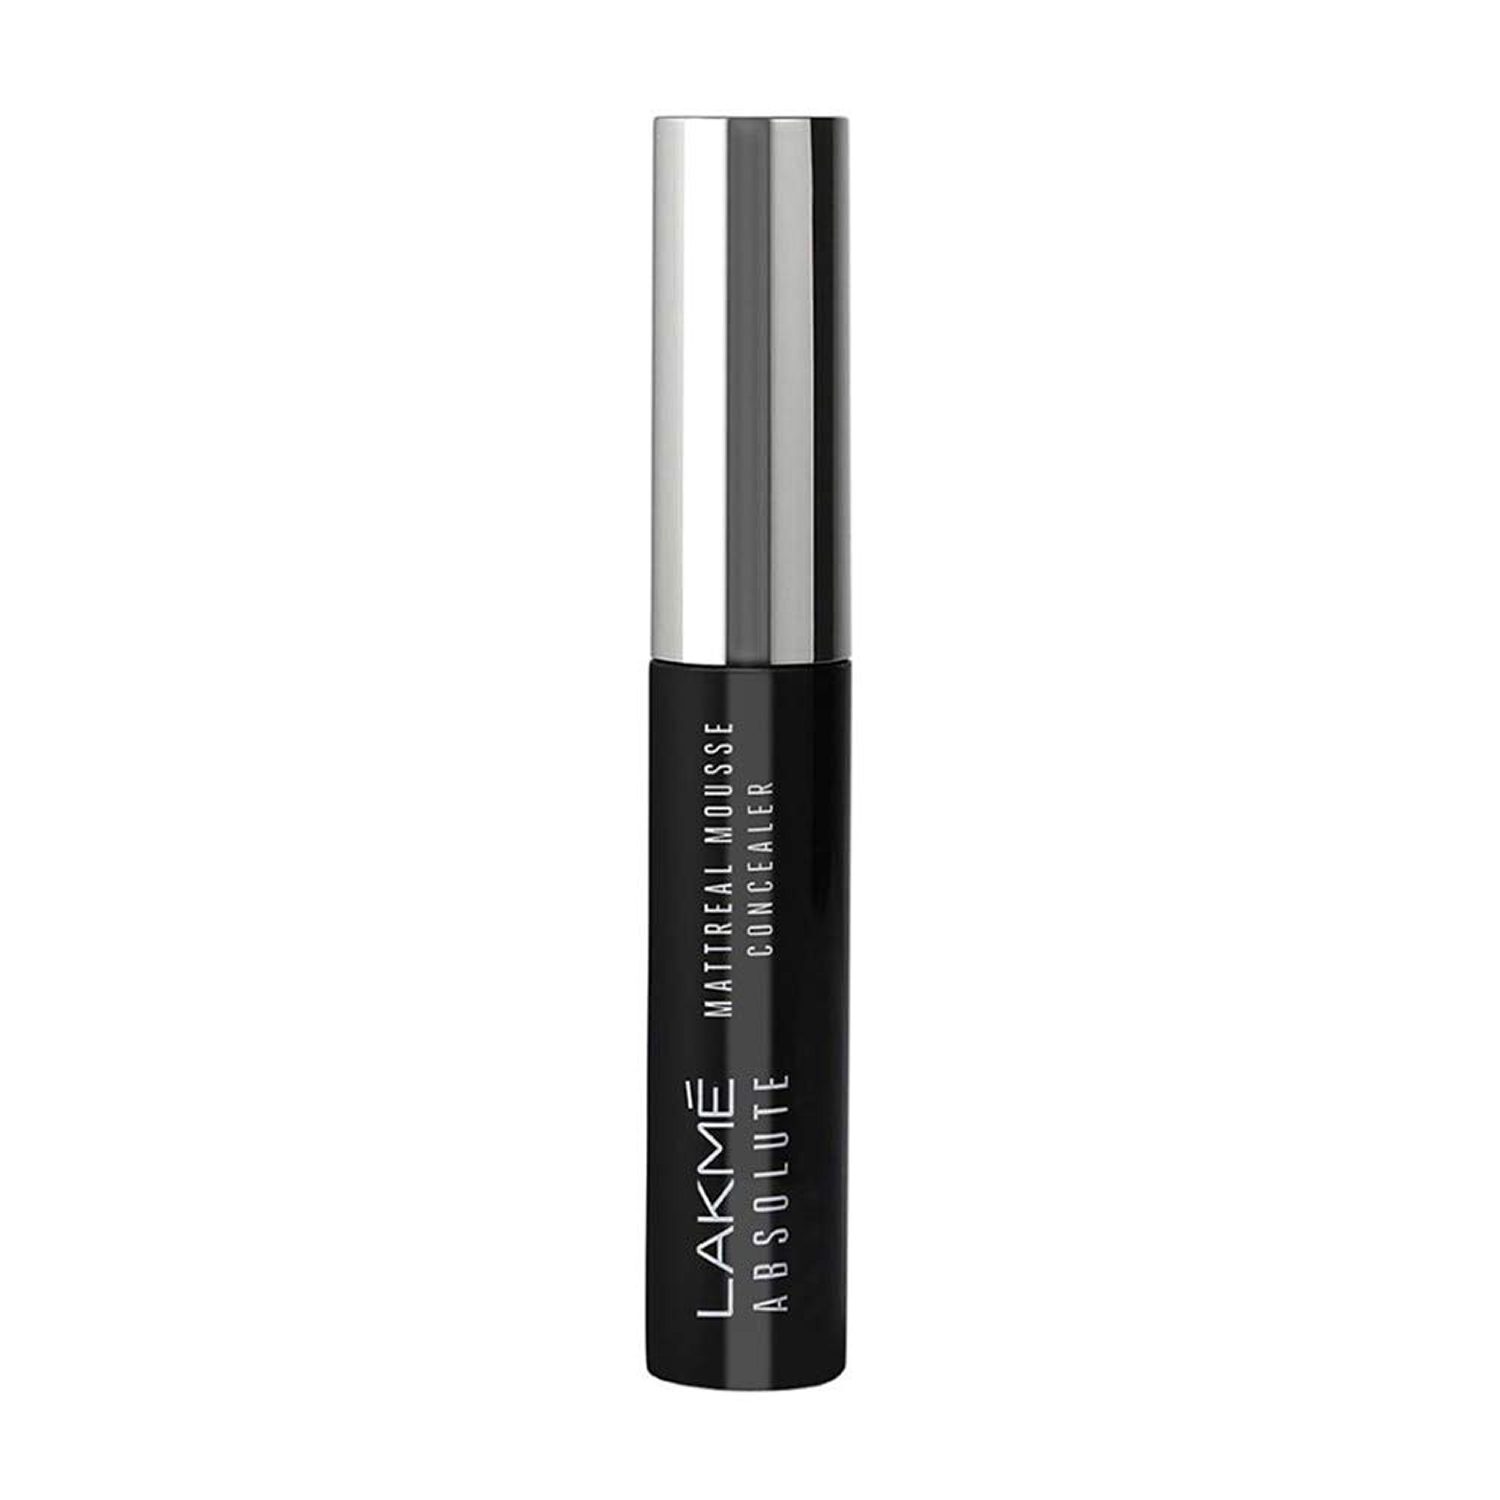 Lakme Absolute Mattereal Mousse Concealer, 9gm-Toffee